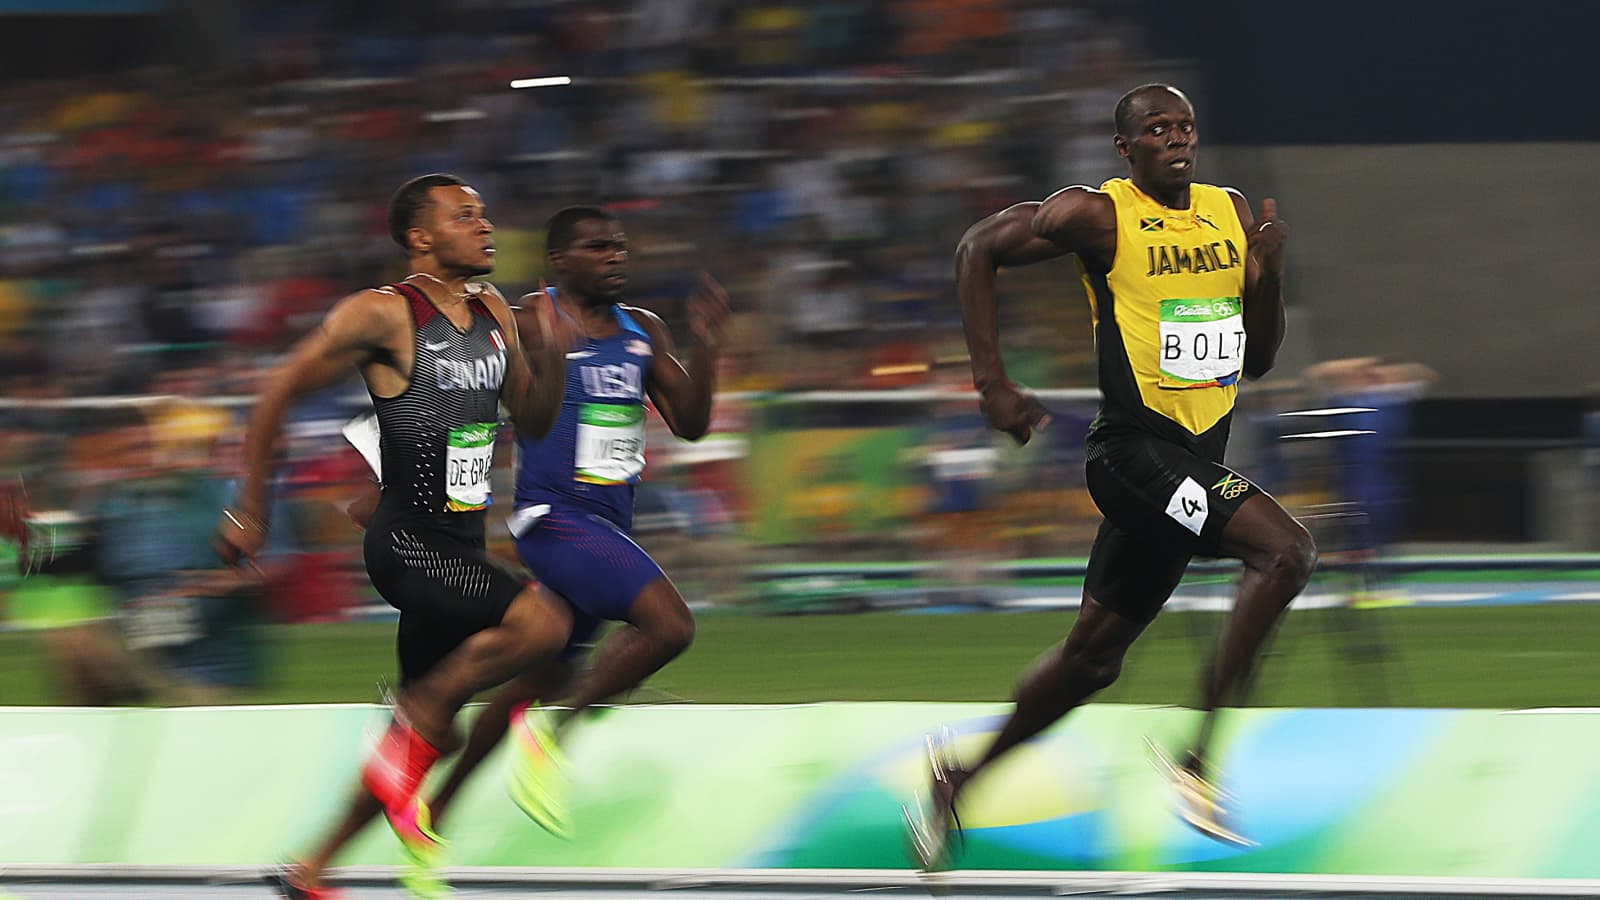 What is the significance of Usain Bolt's victory pose?